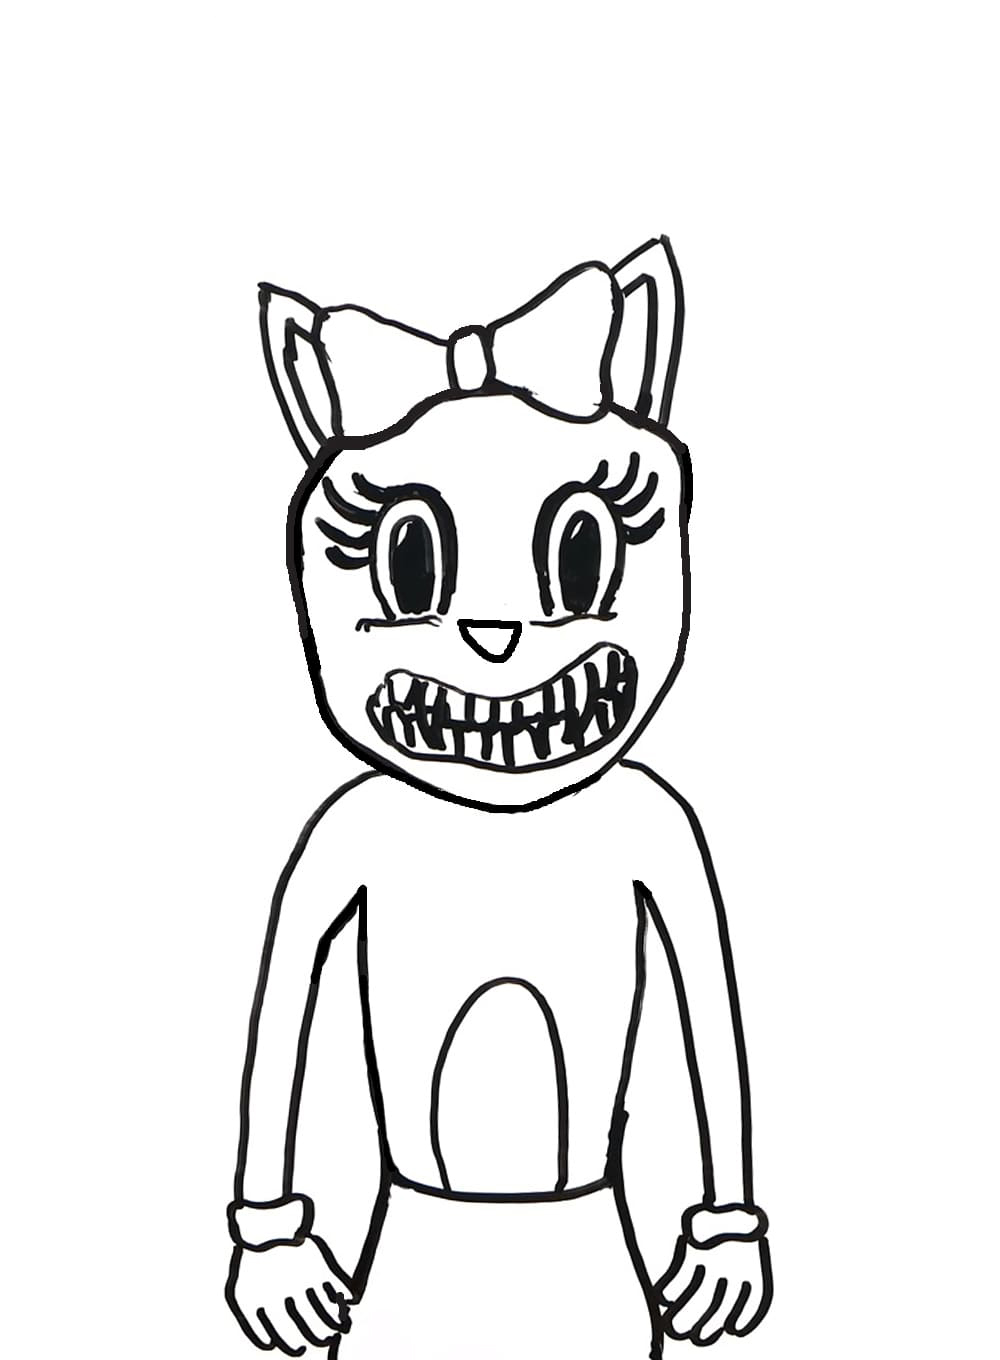 Coloring page Cartoon Cat A girl in the style of a monster